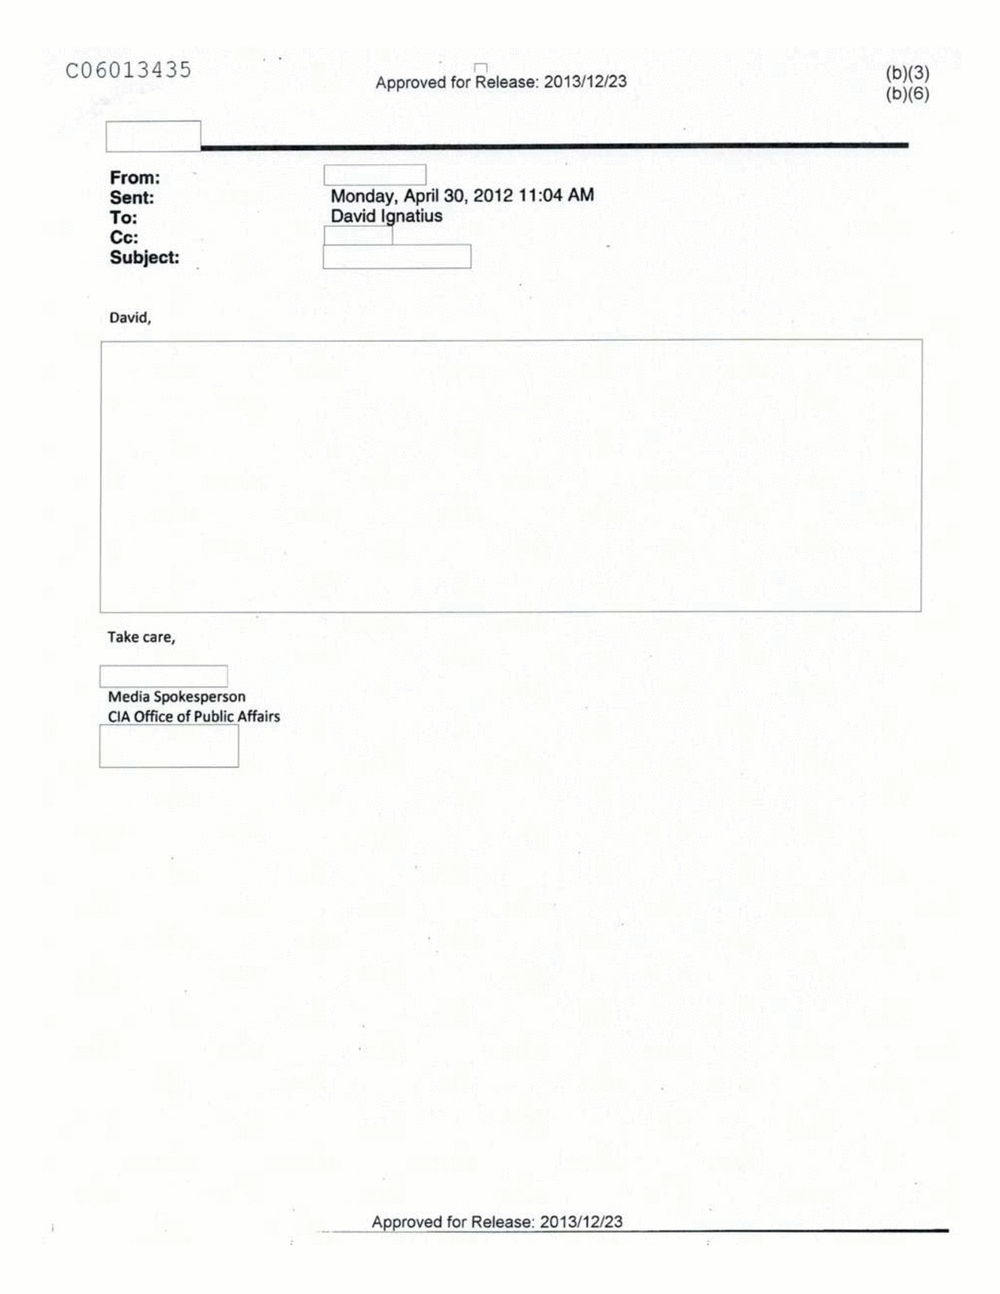 Page 297 from Email Correspondence Between Reporters and CIA Flacks